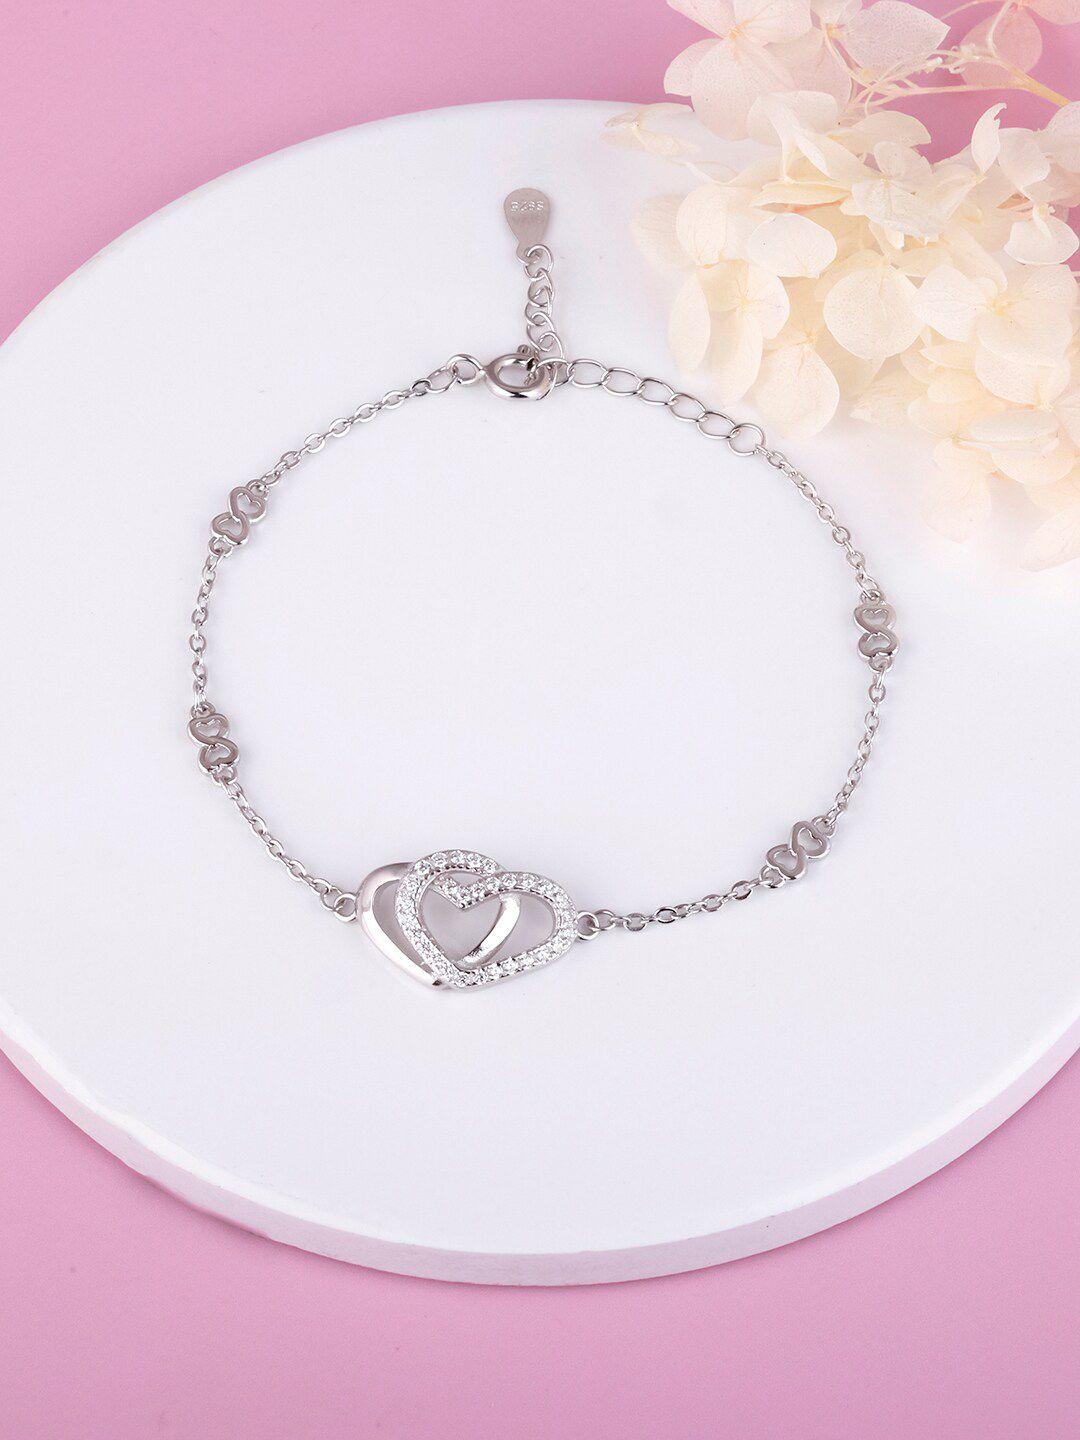 giva 925 sterling silver & rhodium-plated cubic zirconia hearts link bracelet